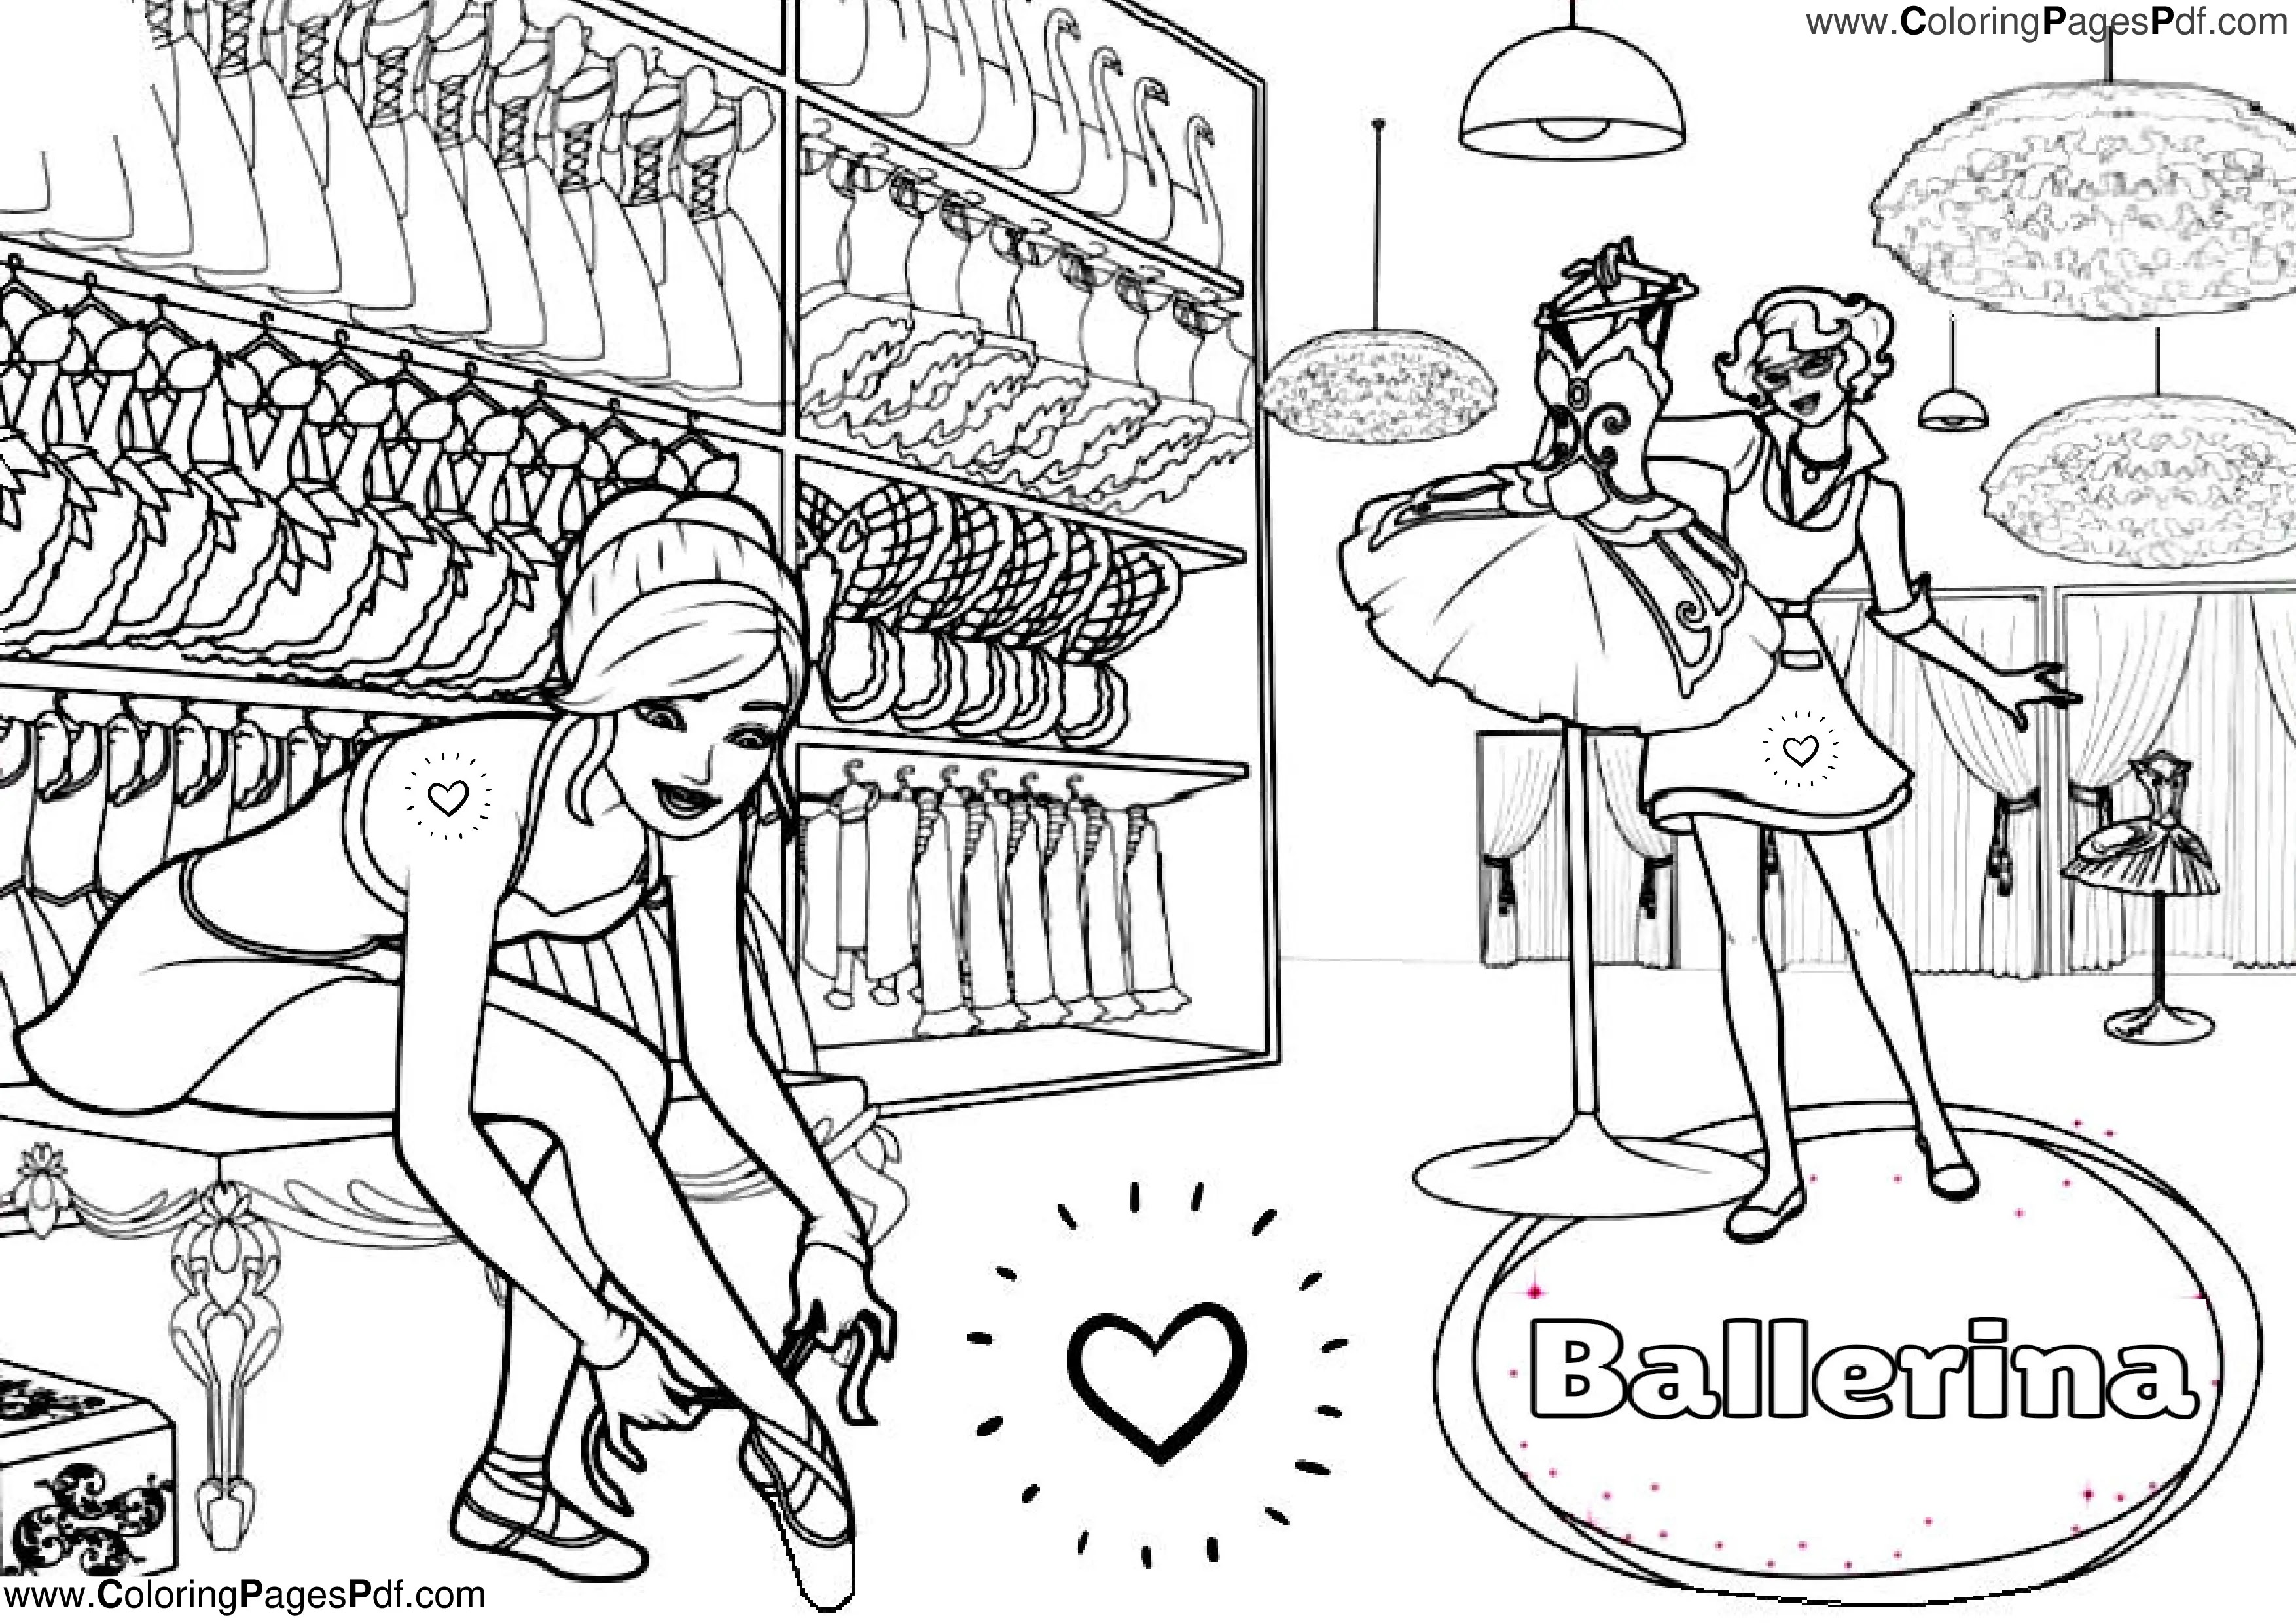 Ballerina coloring pages printable